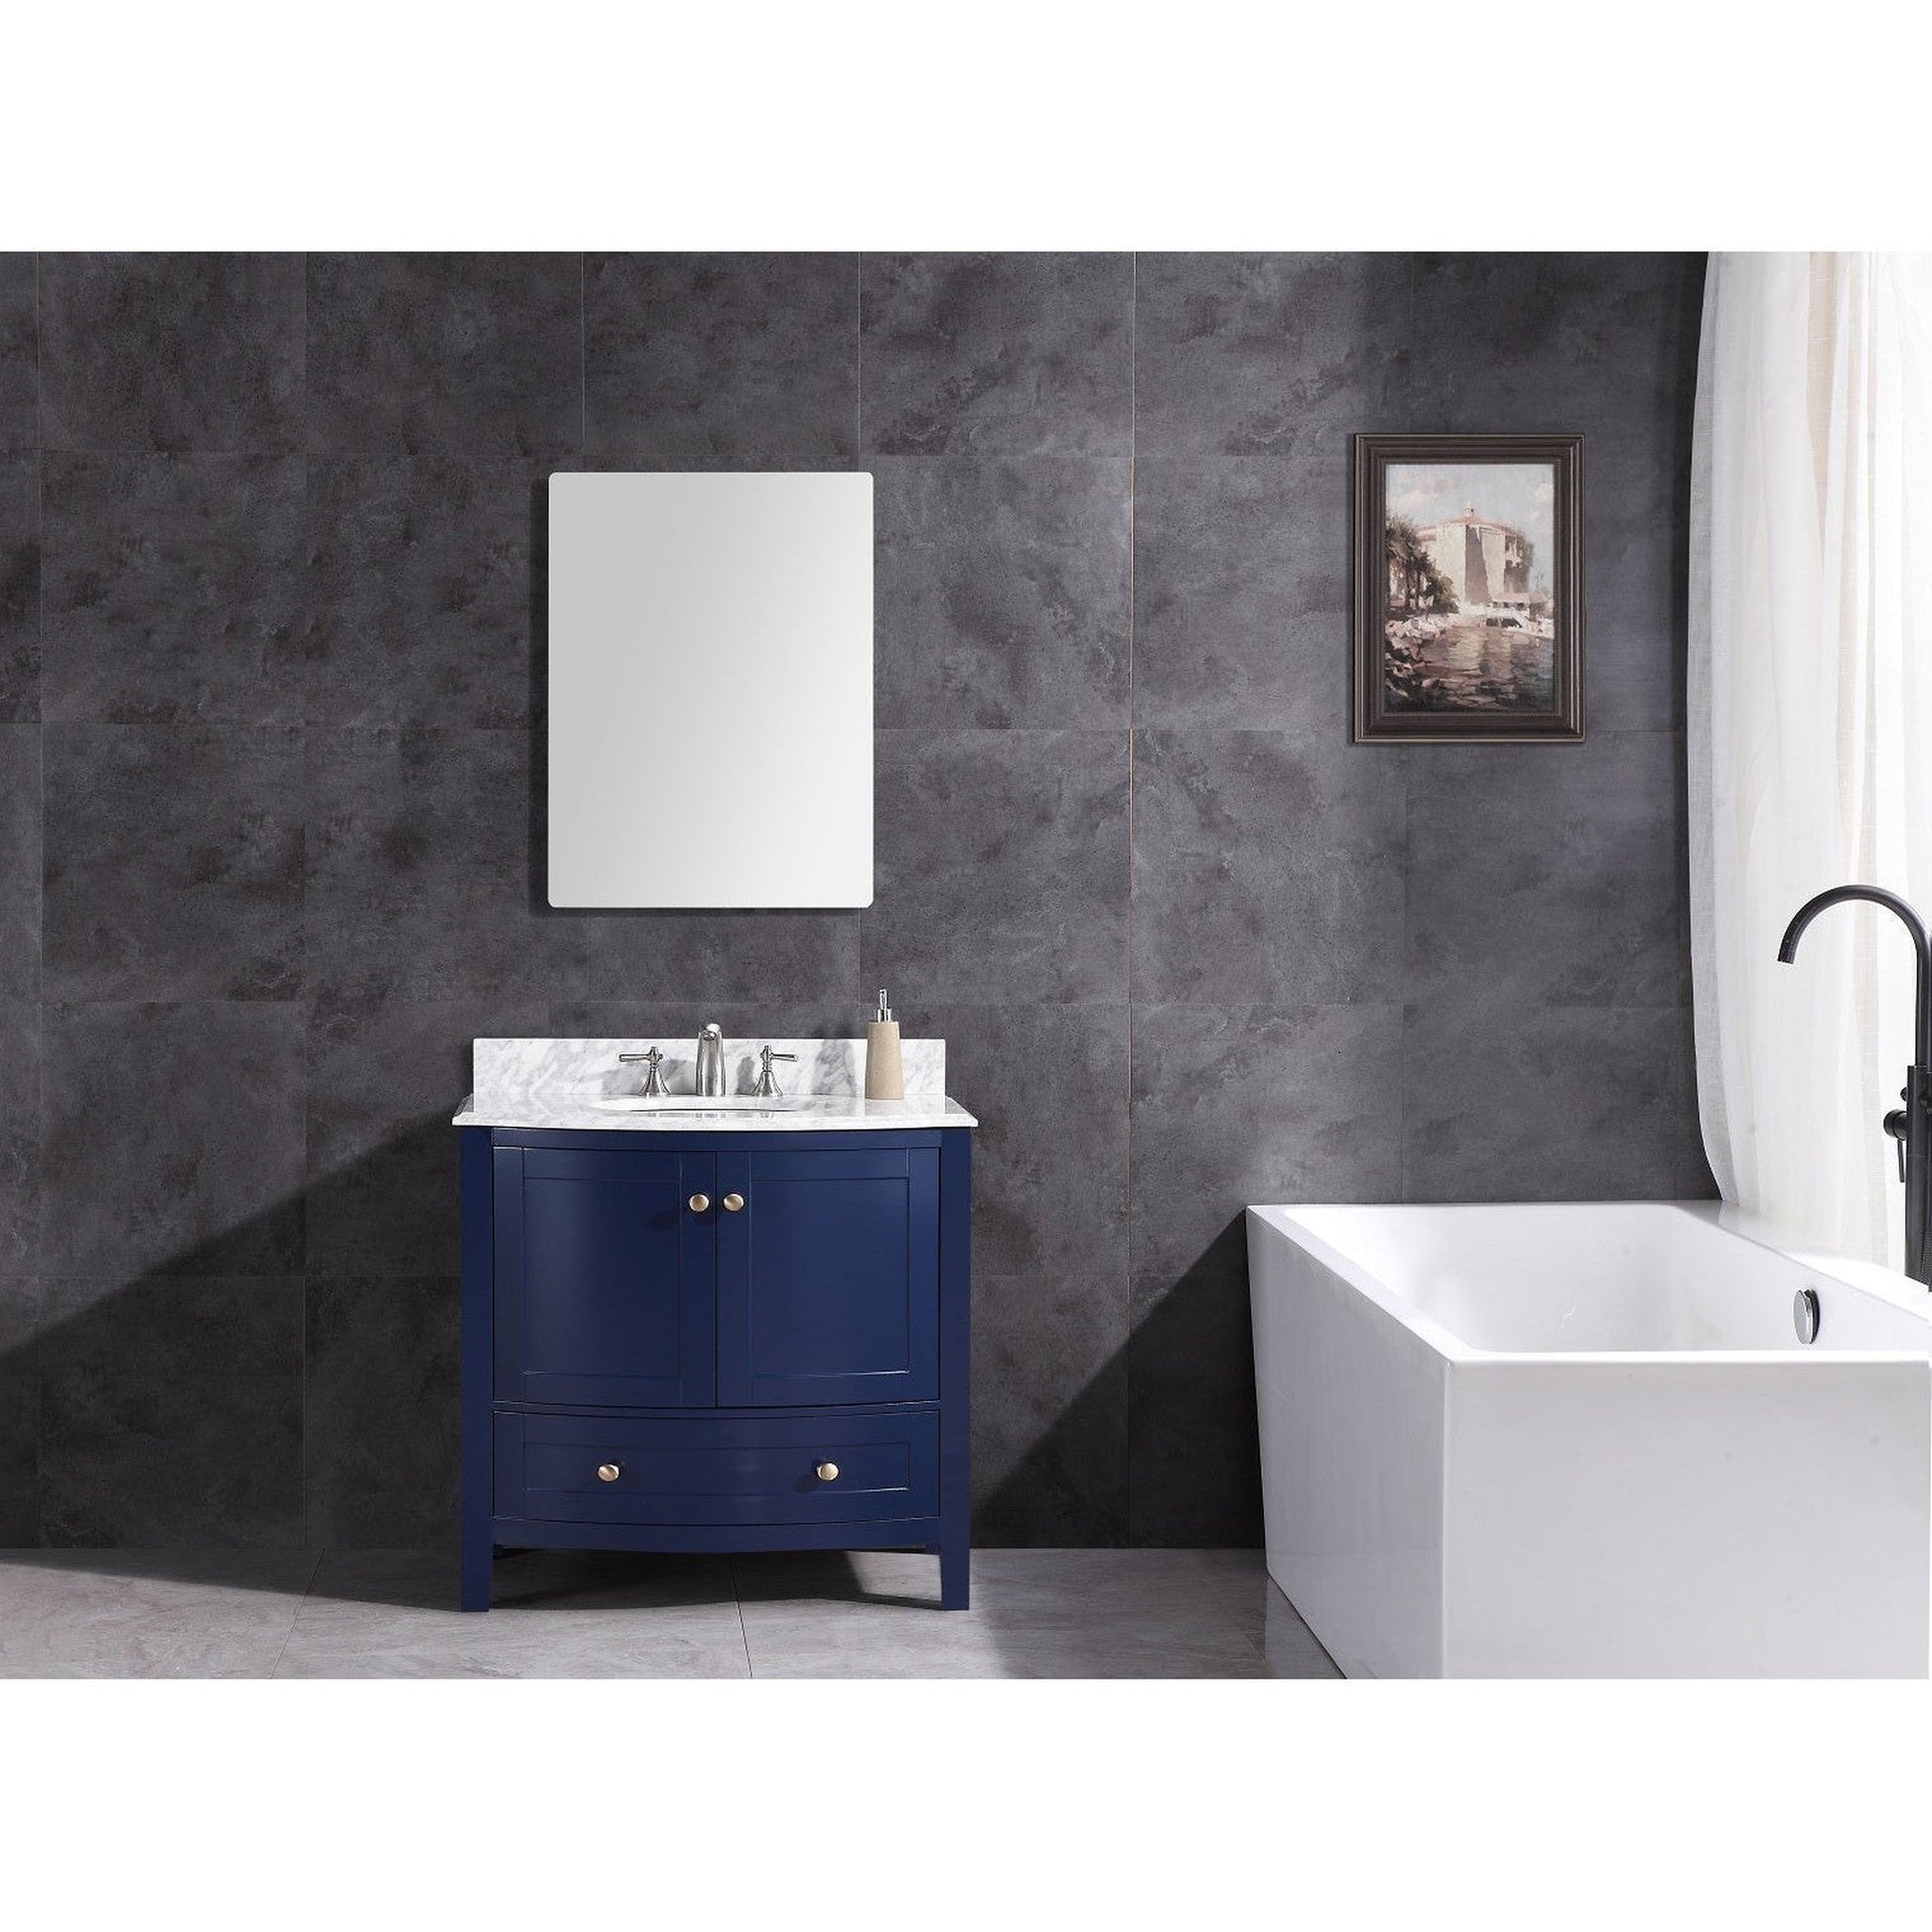 Legion Furniture WT9309 36" Blue Freestanding PVC Vanity Cabinet With Marble Top and White Ceramic Sink